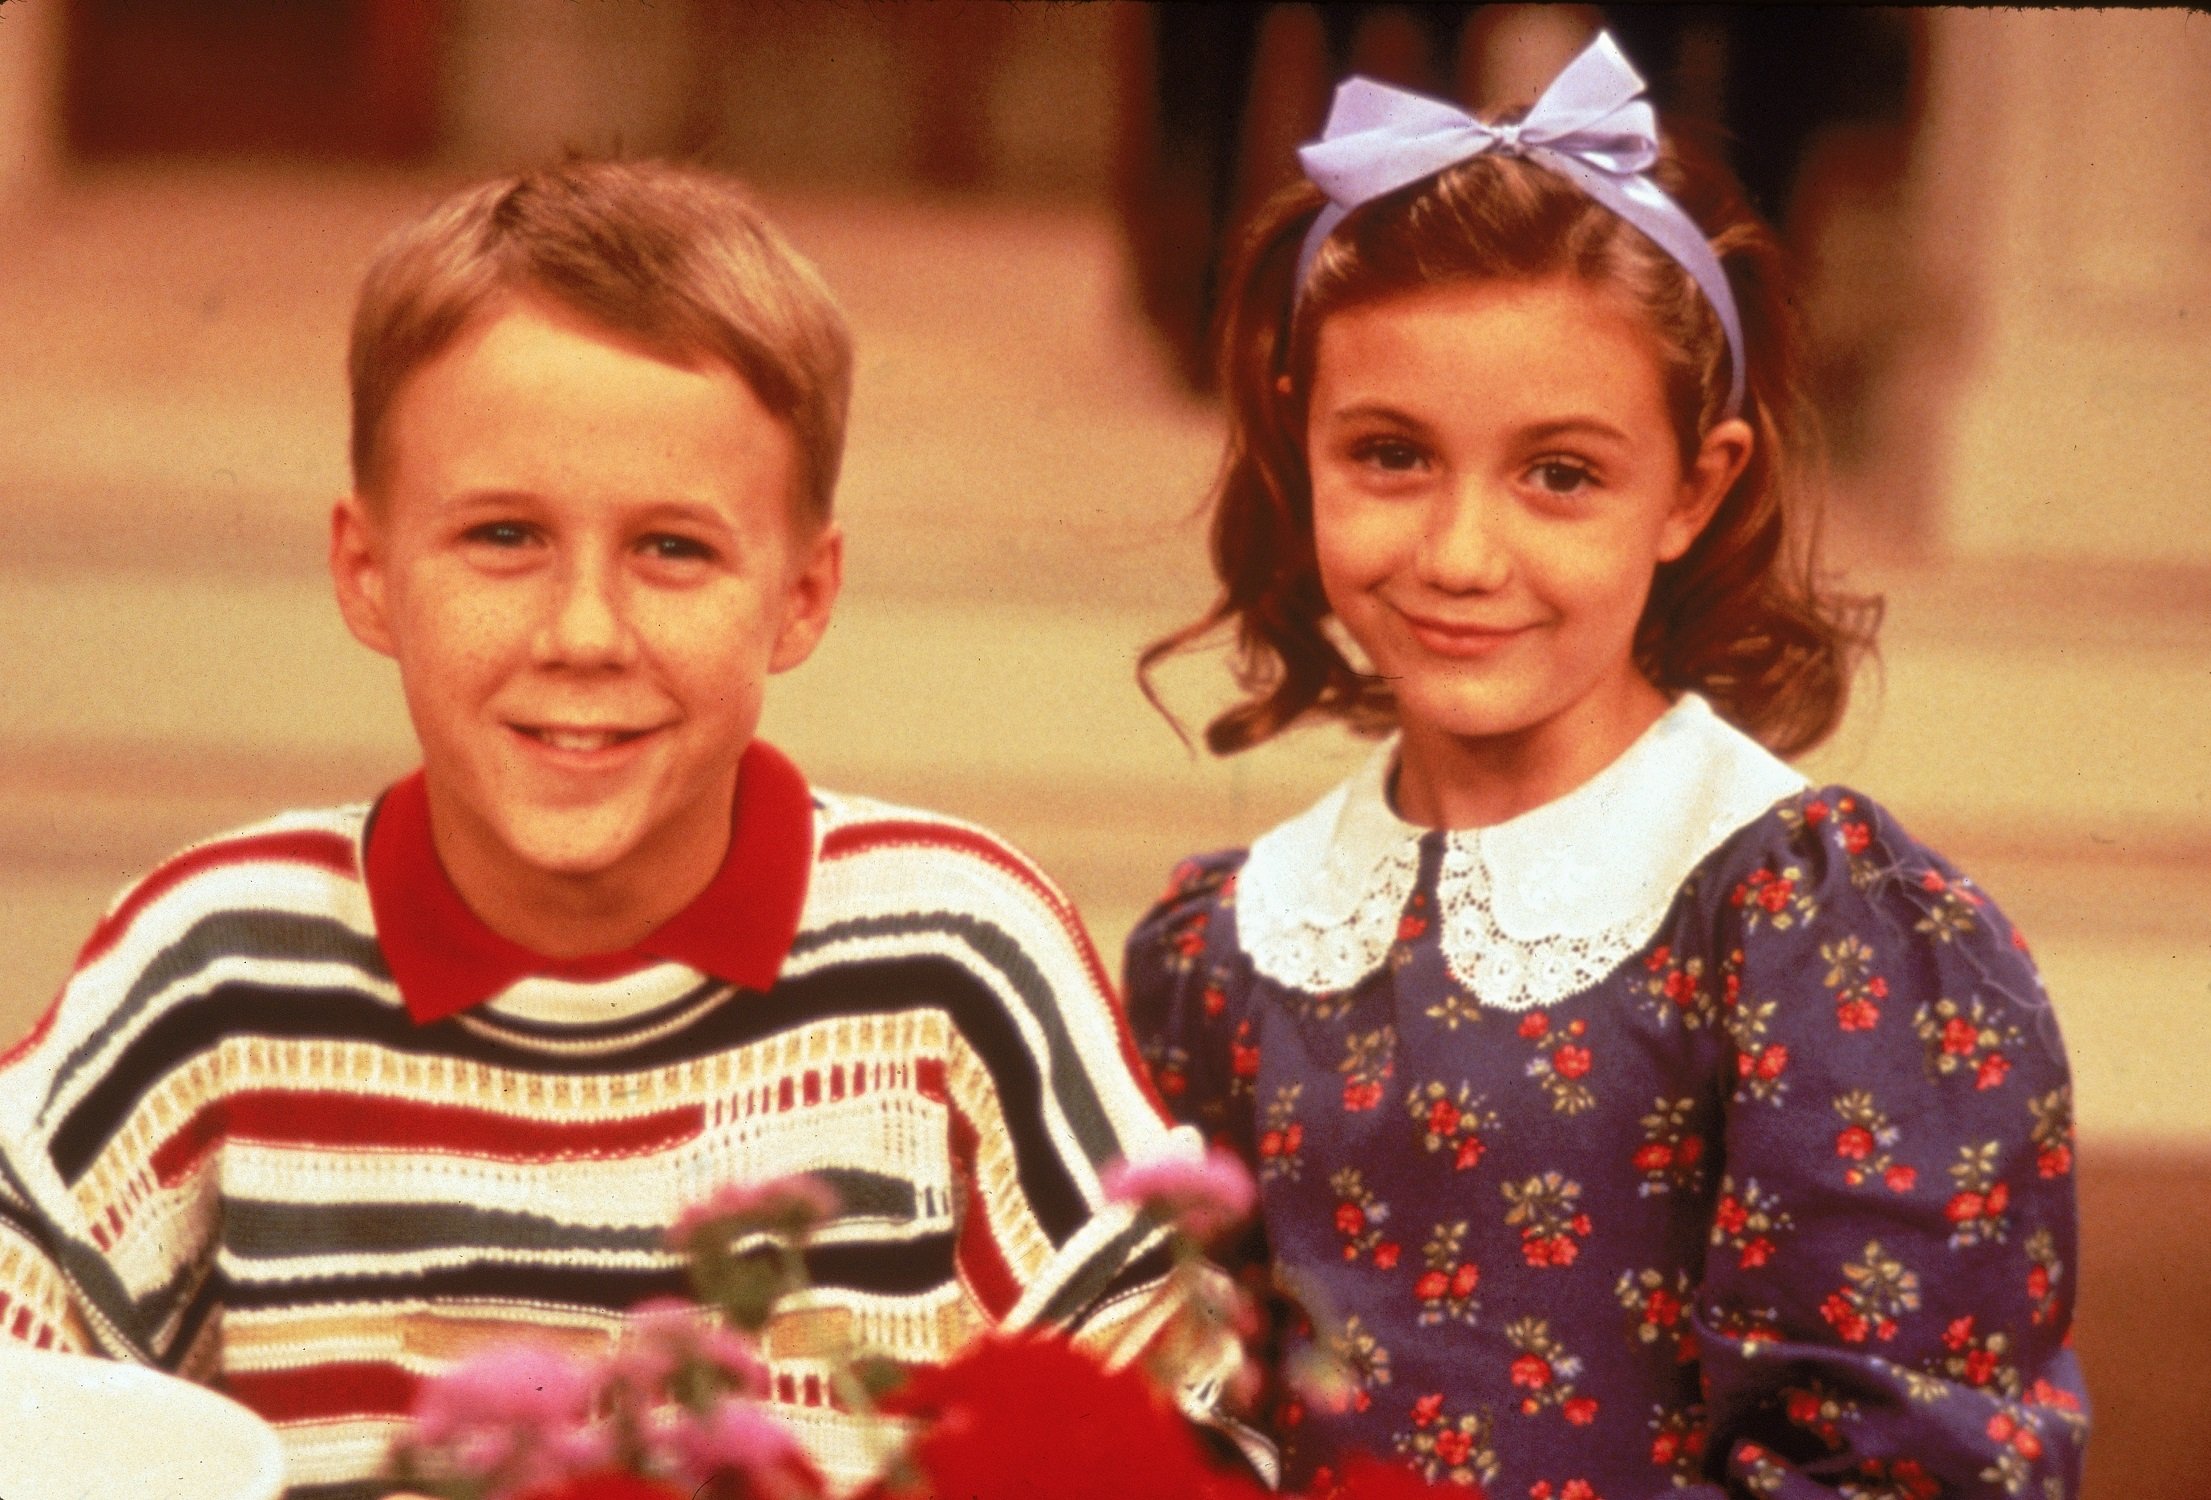 Benjamin Salisbury and Madeline Zima appear in a promotional photo for 'The Nanny'. The child actors played Brighton and Grace Sheffield 